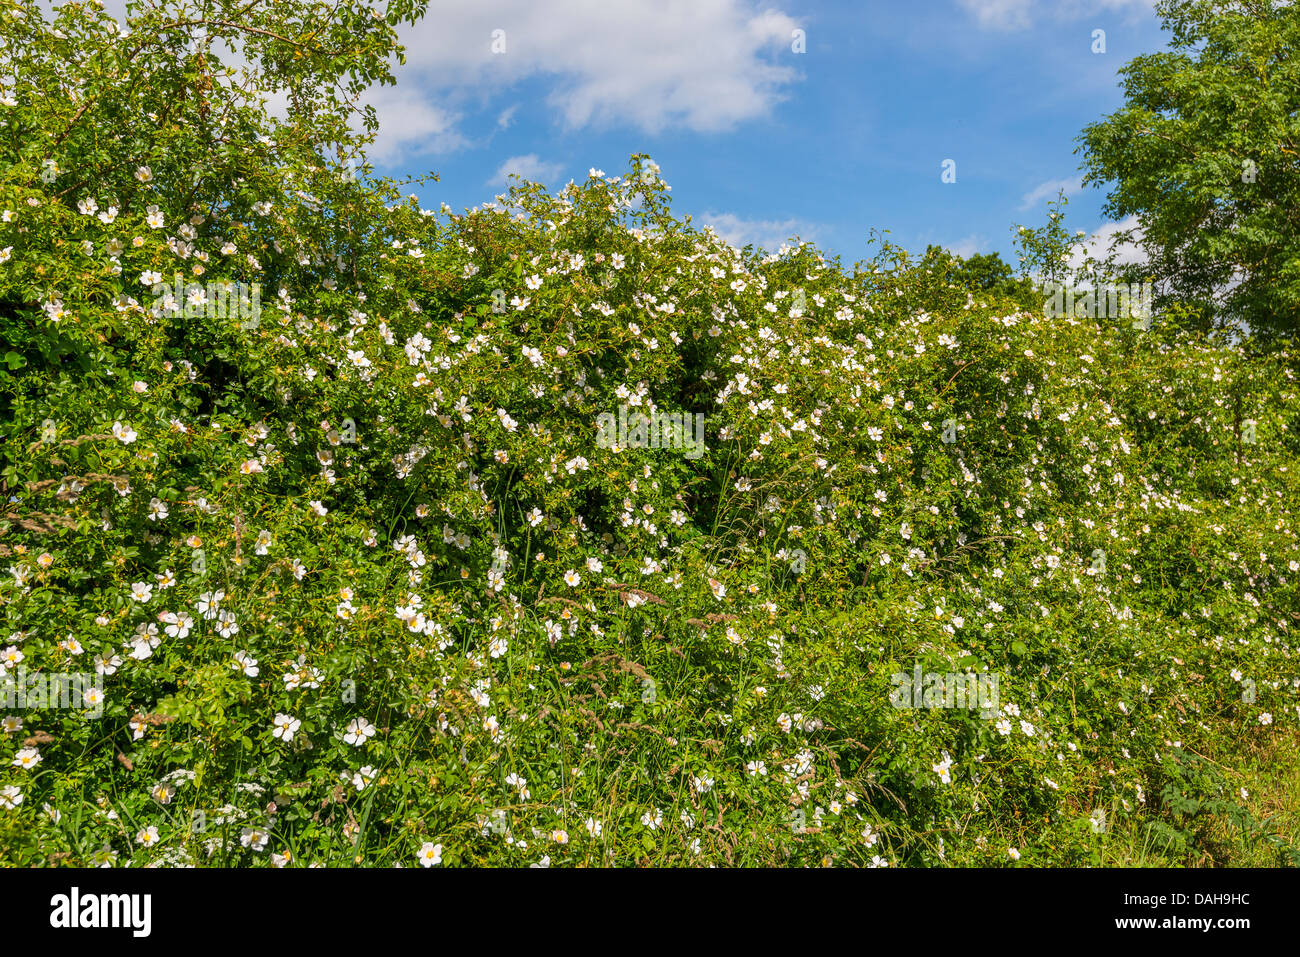 Wild dog rose, Rosa canina, in flower, growing in hedgerow. Stock Photo